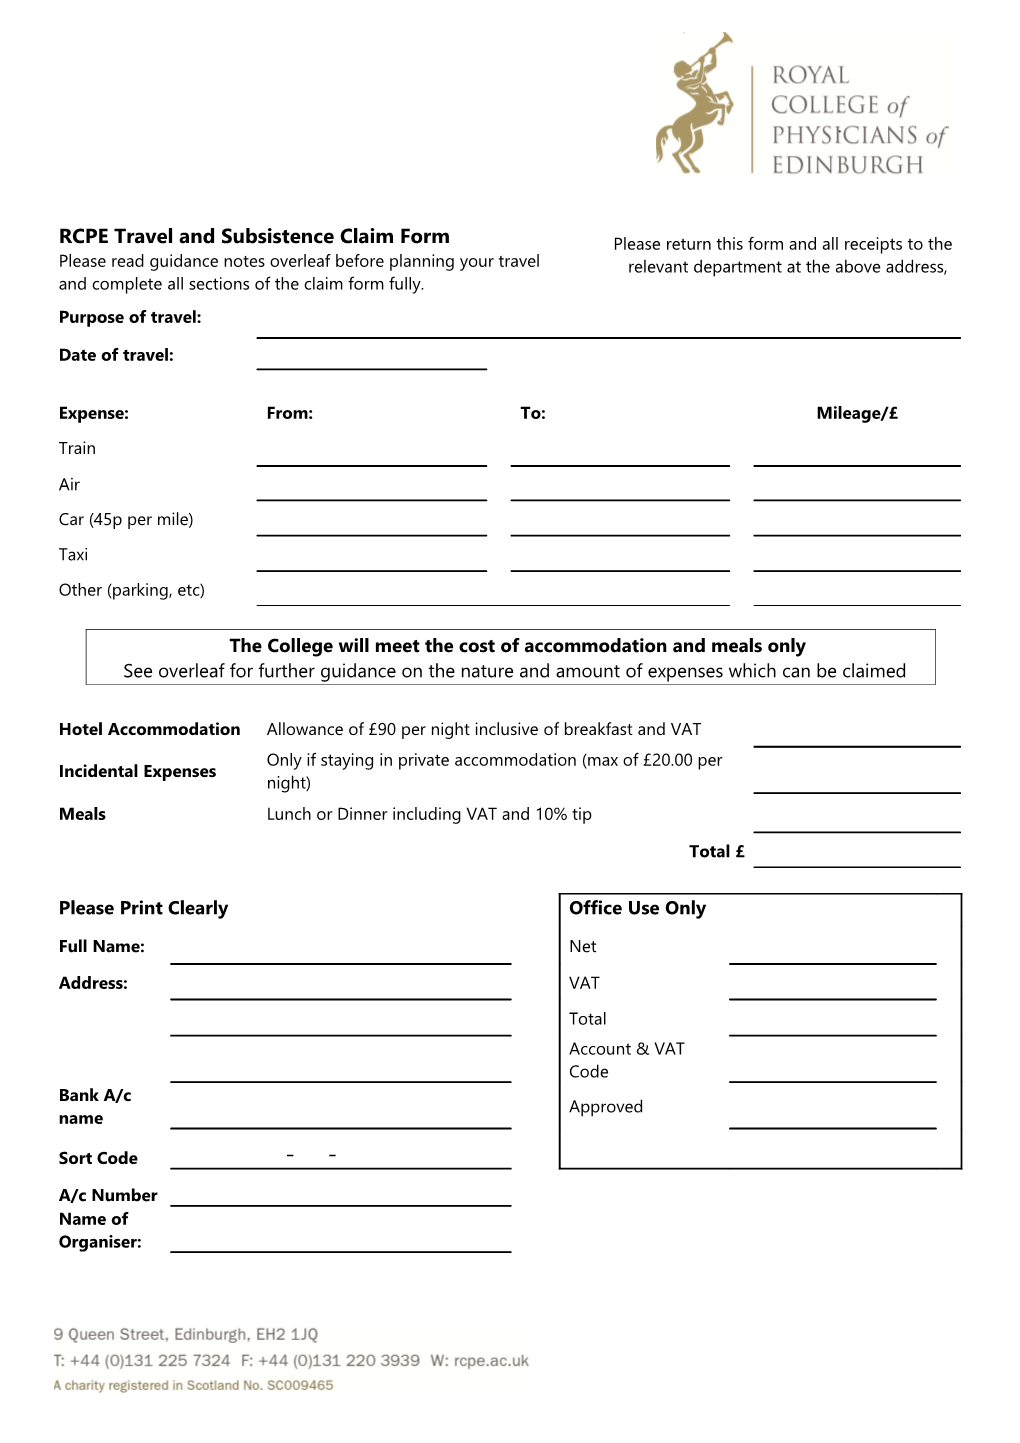 Travel and Subsistence Expenses Claim Form